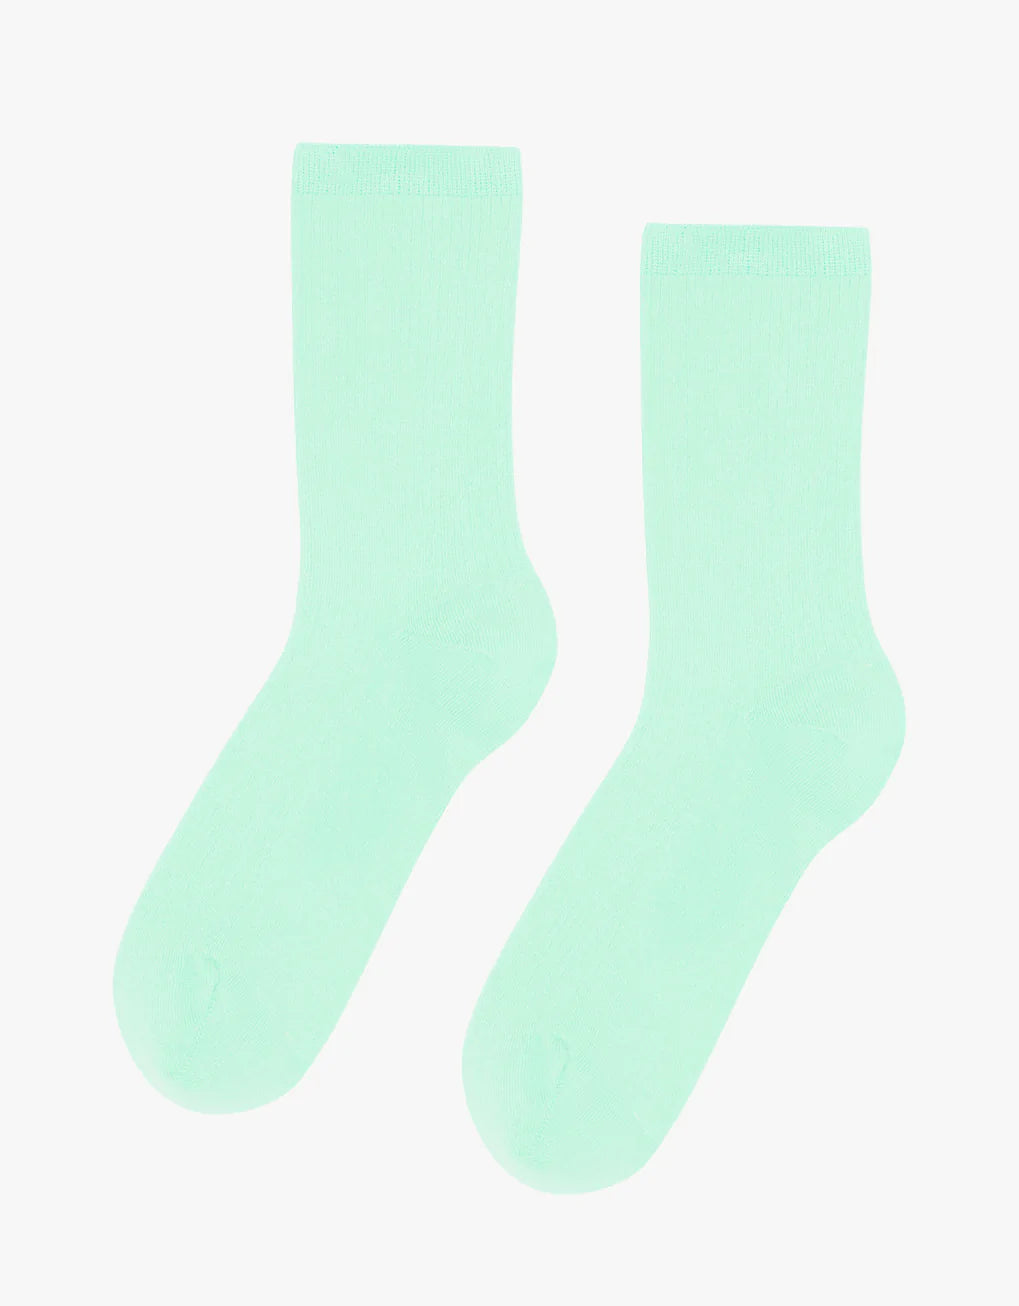 A pair of Colorful Standard Classic Organic Socks in a mint green color on a white background. The socks are anti-pilling, seamless, and breathable.